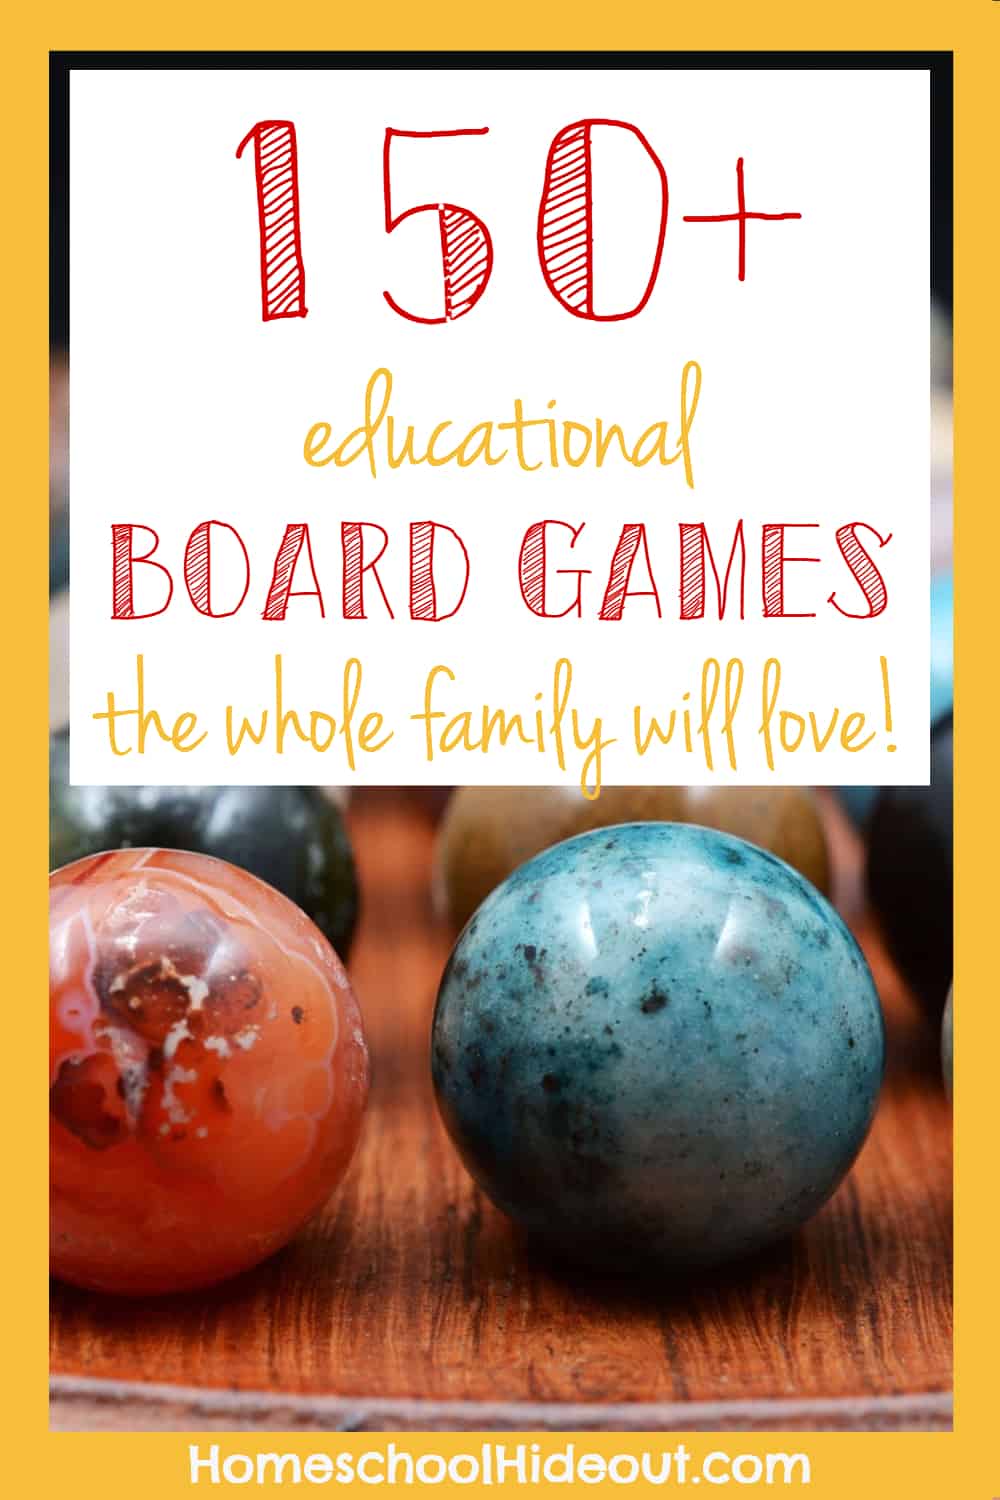 150+ educational board games the whole family will love!